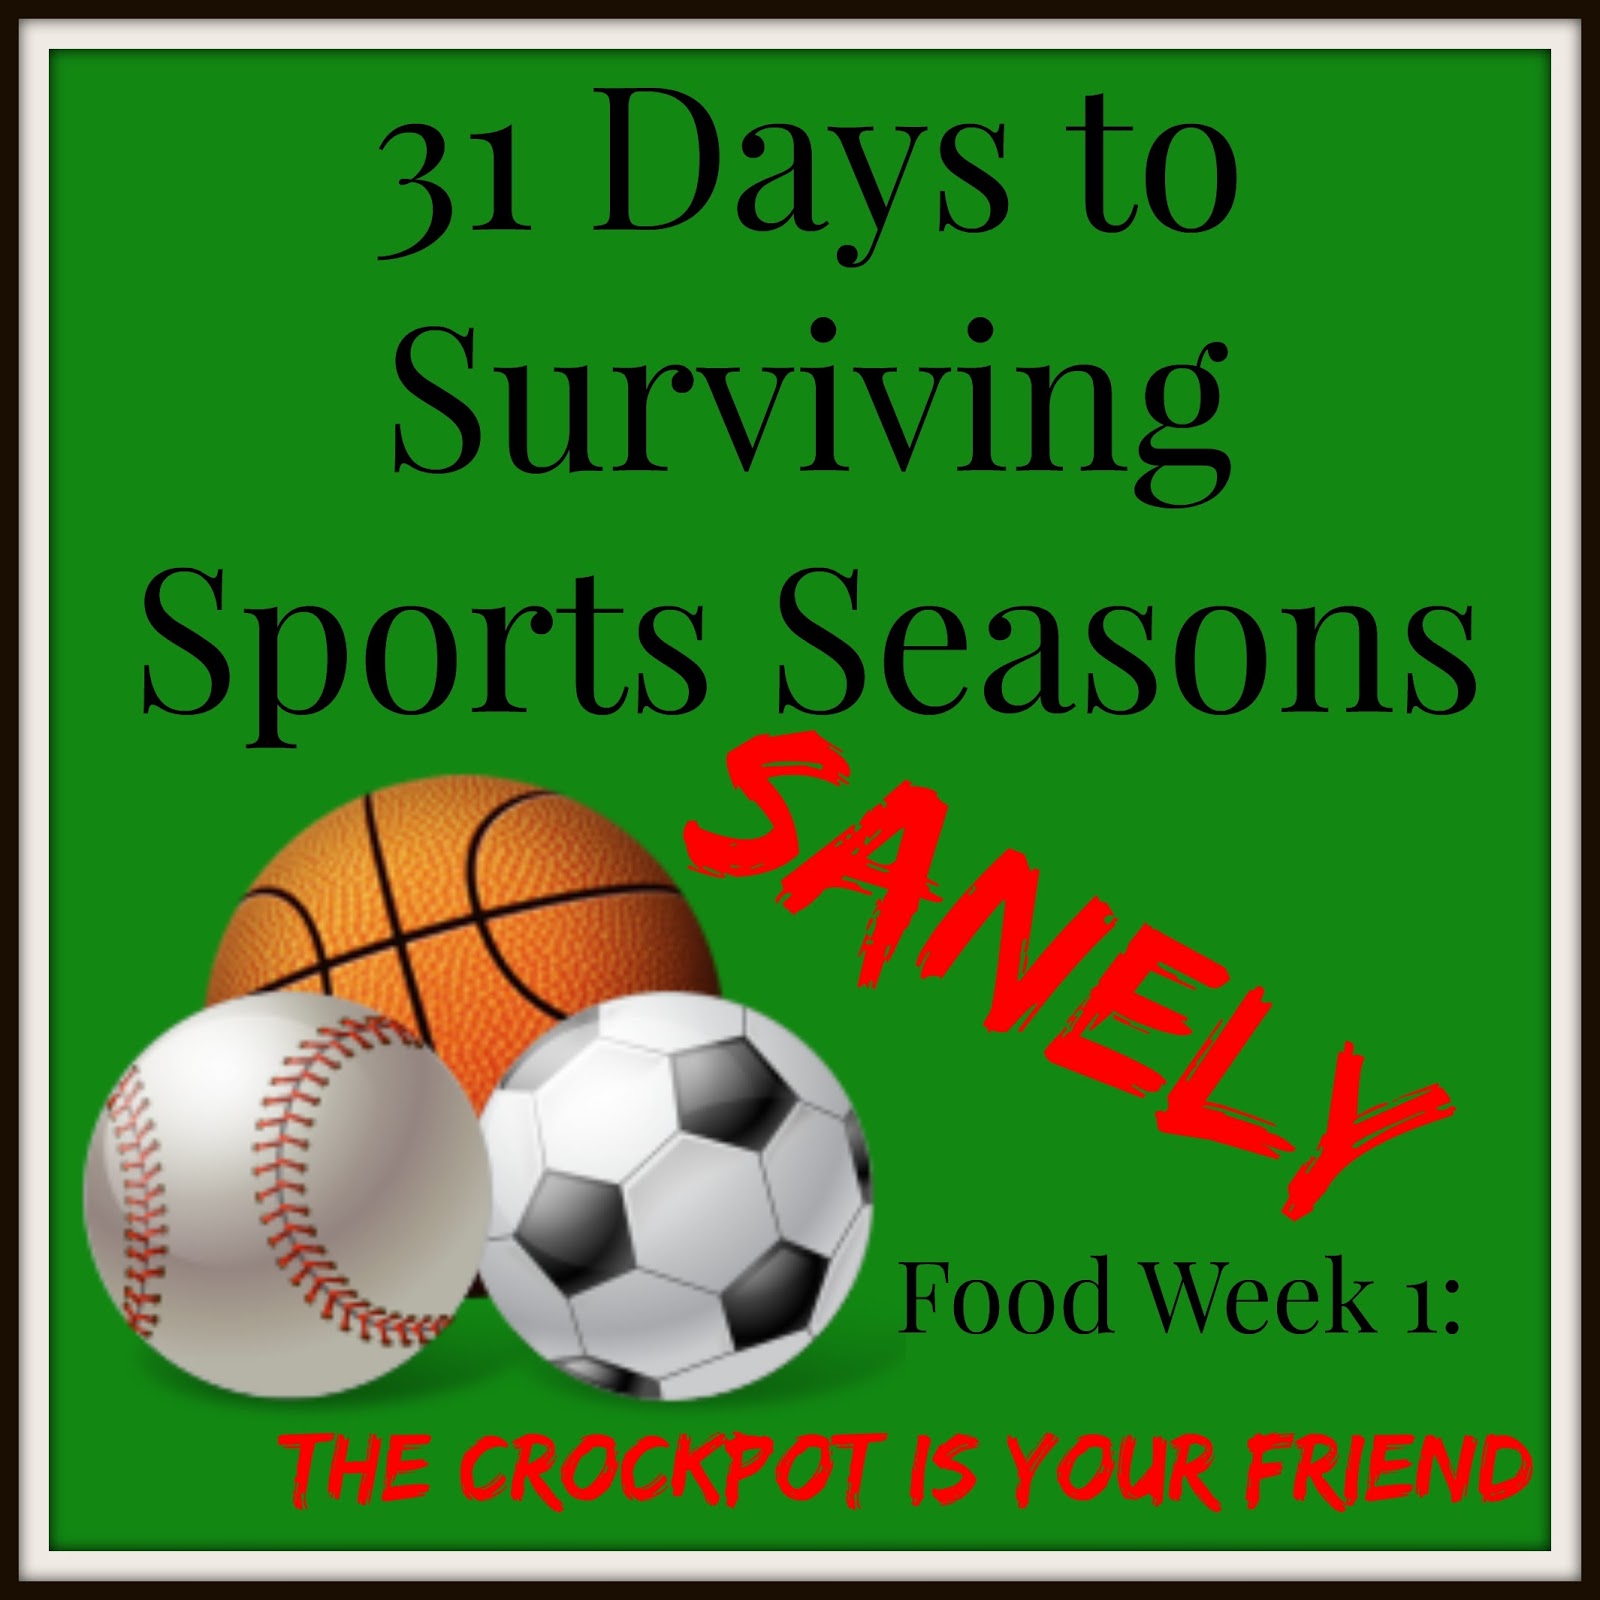 31 Days to Surviving Sports Seasons Sanely: The Crockpot is Your Friend